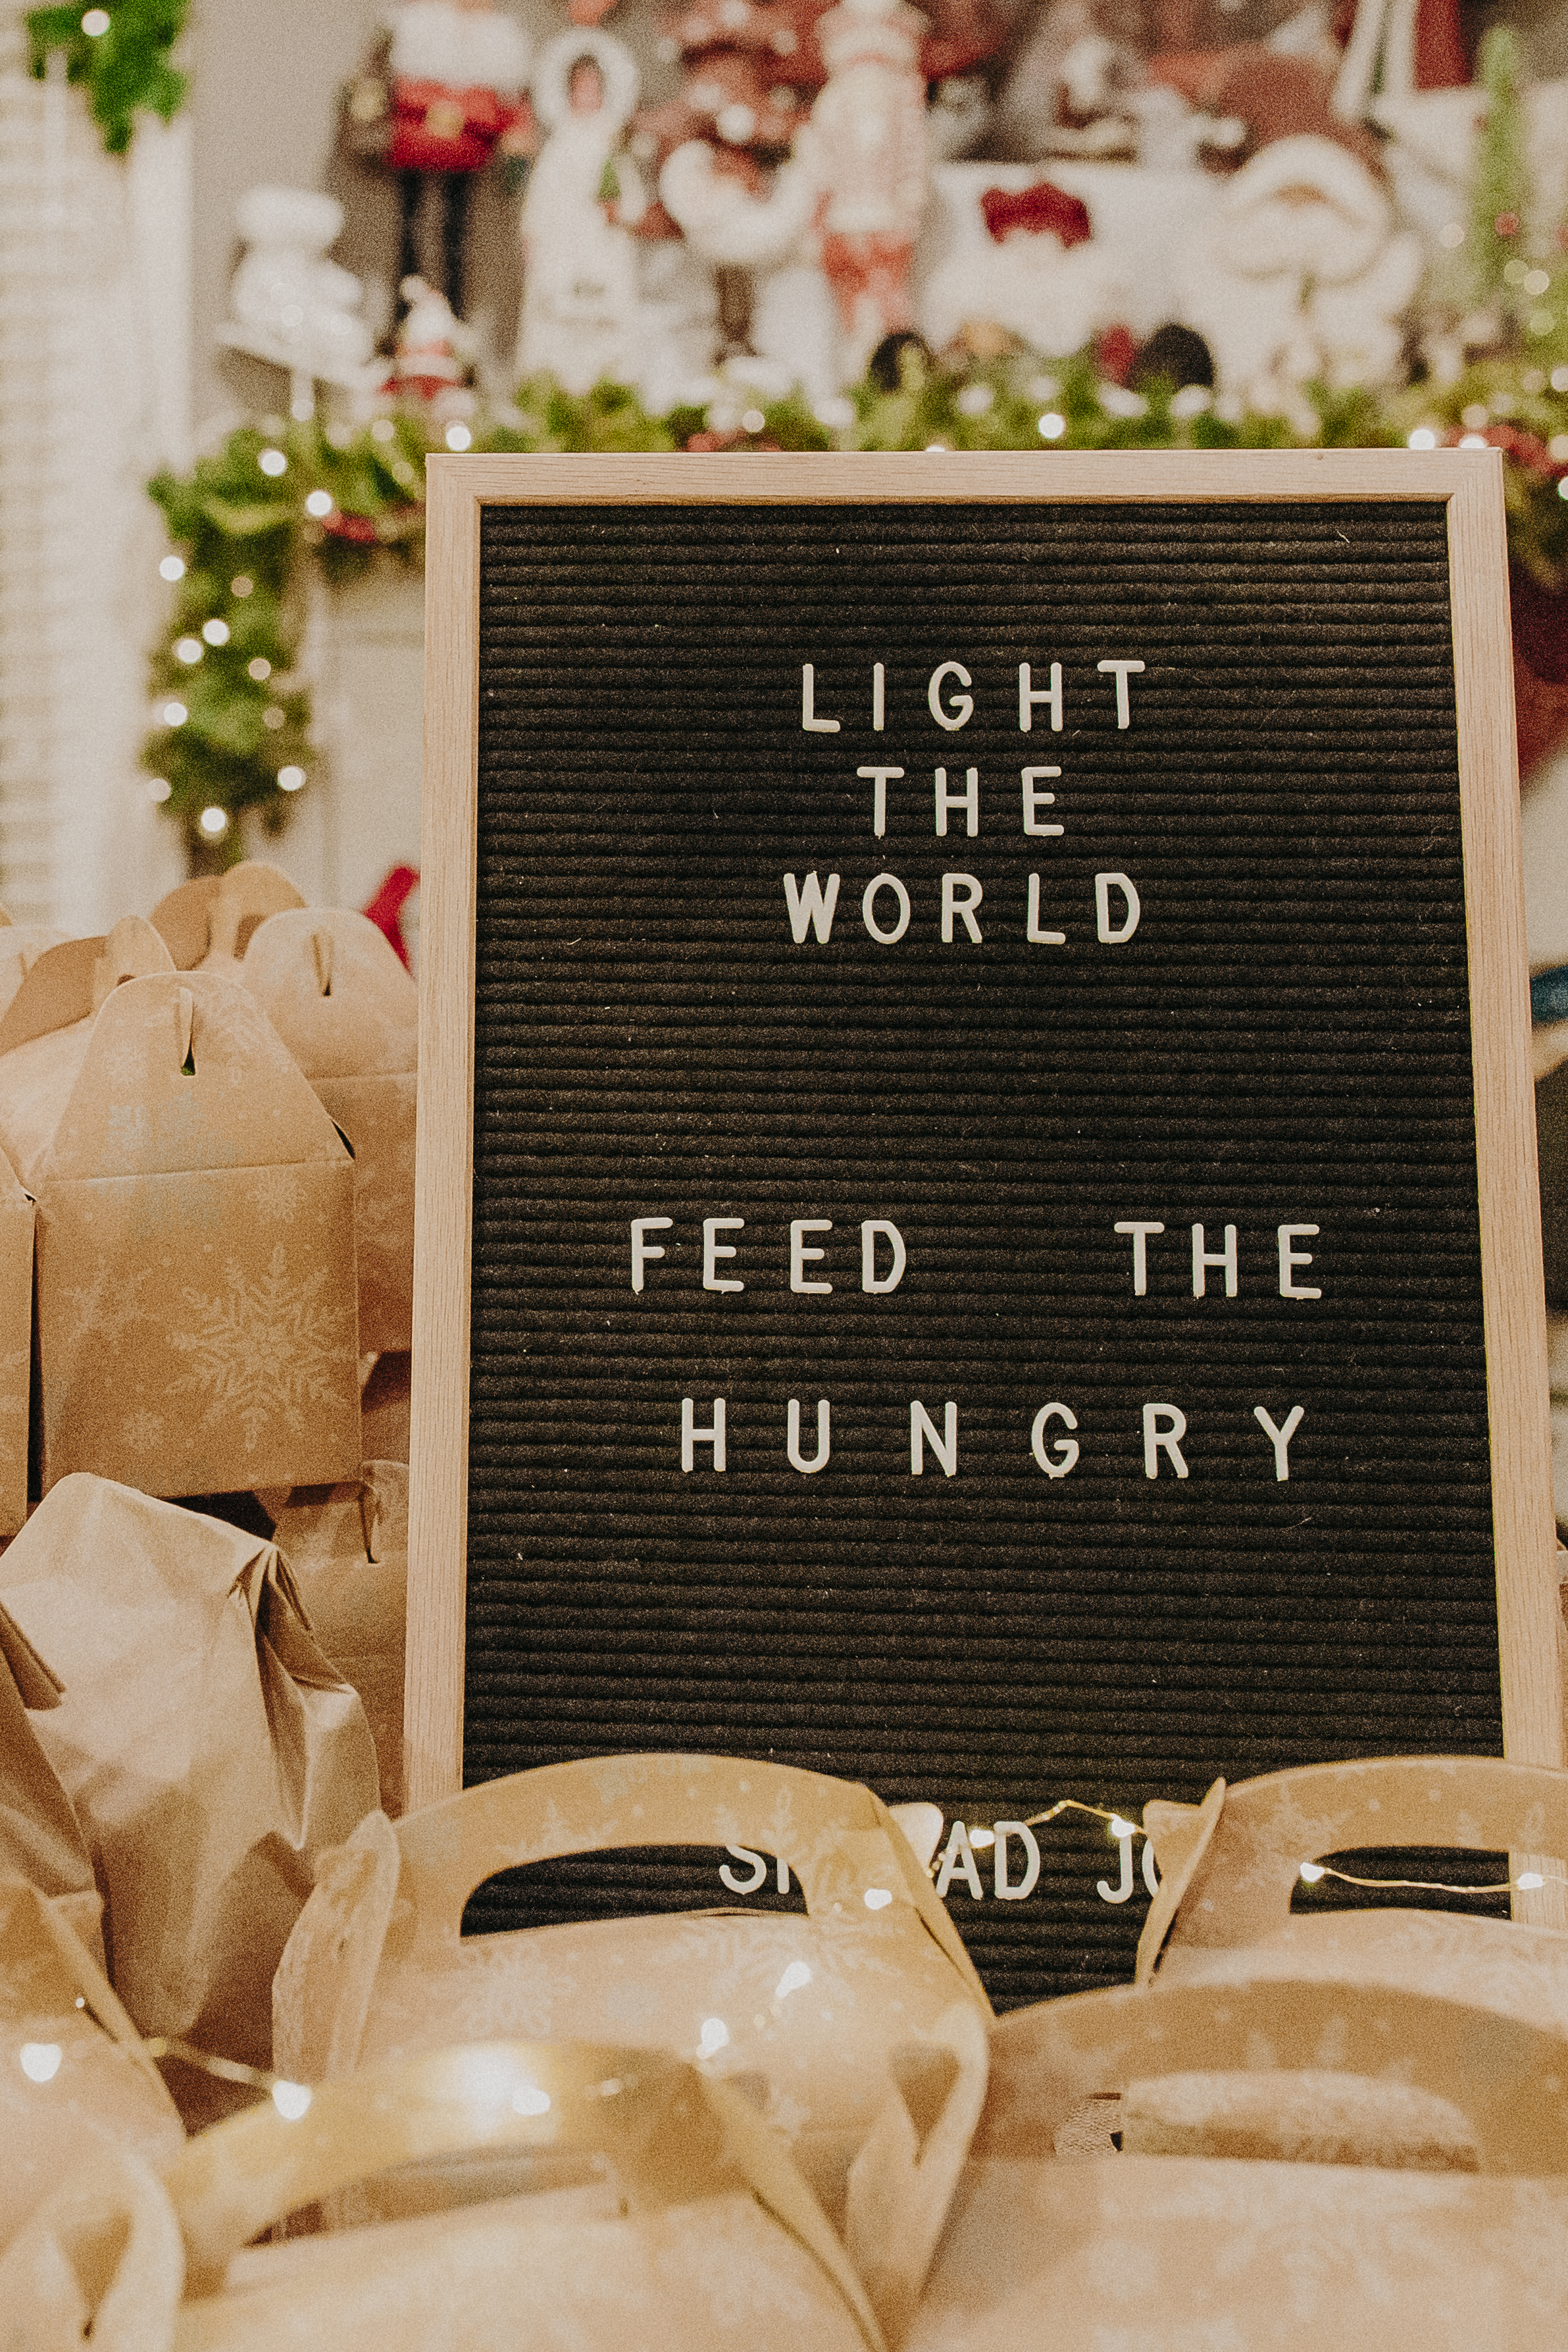 Light-The-World-Feed-The-Hungry-The-Church-Of-Jesus-Christ-Of-Latter-Day-Saints-17.jpg